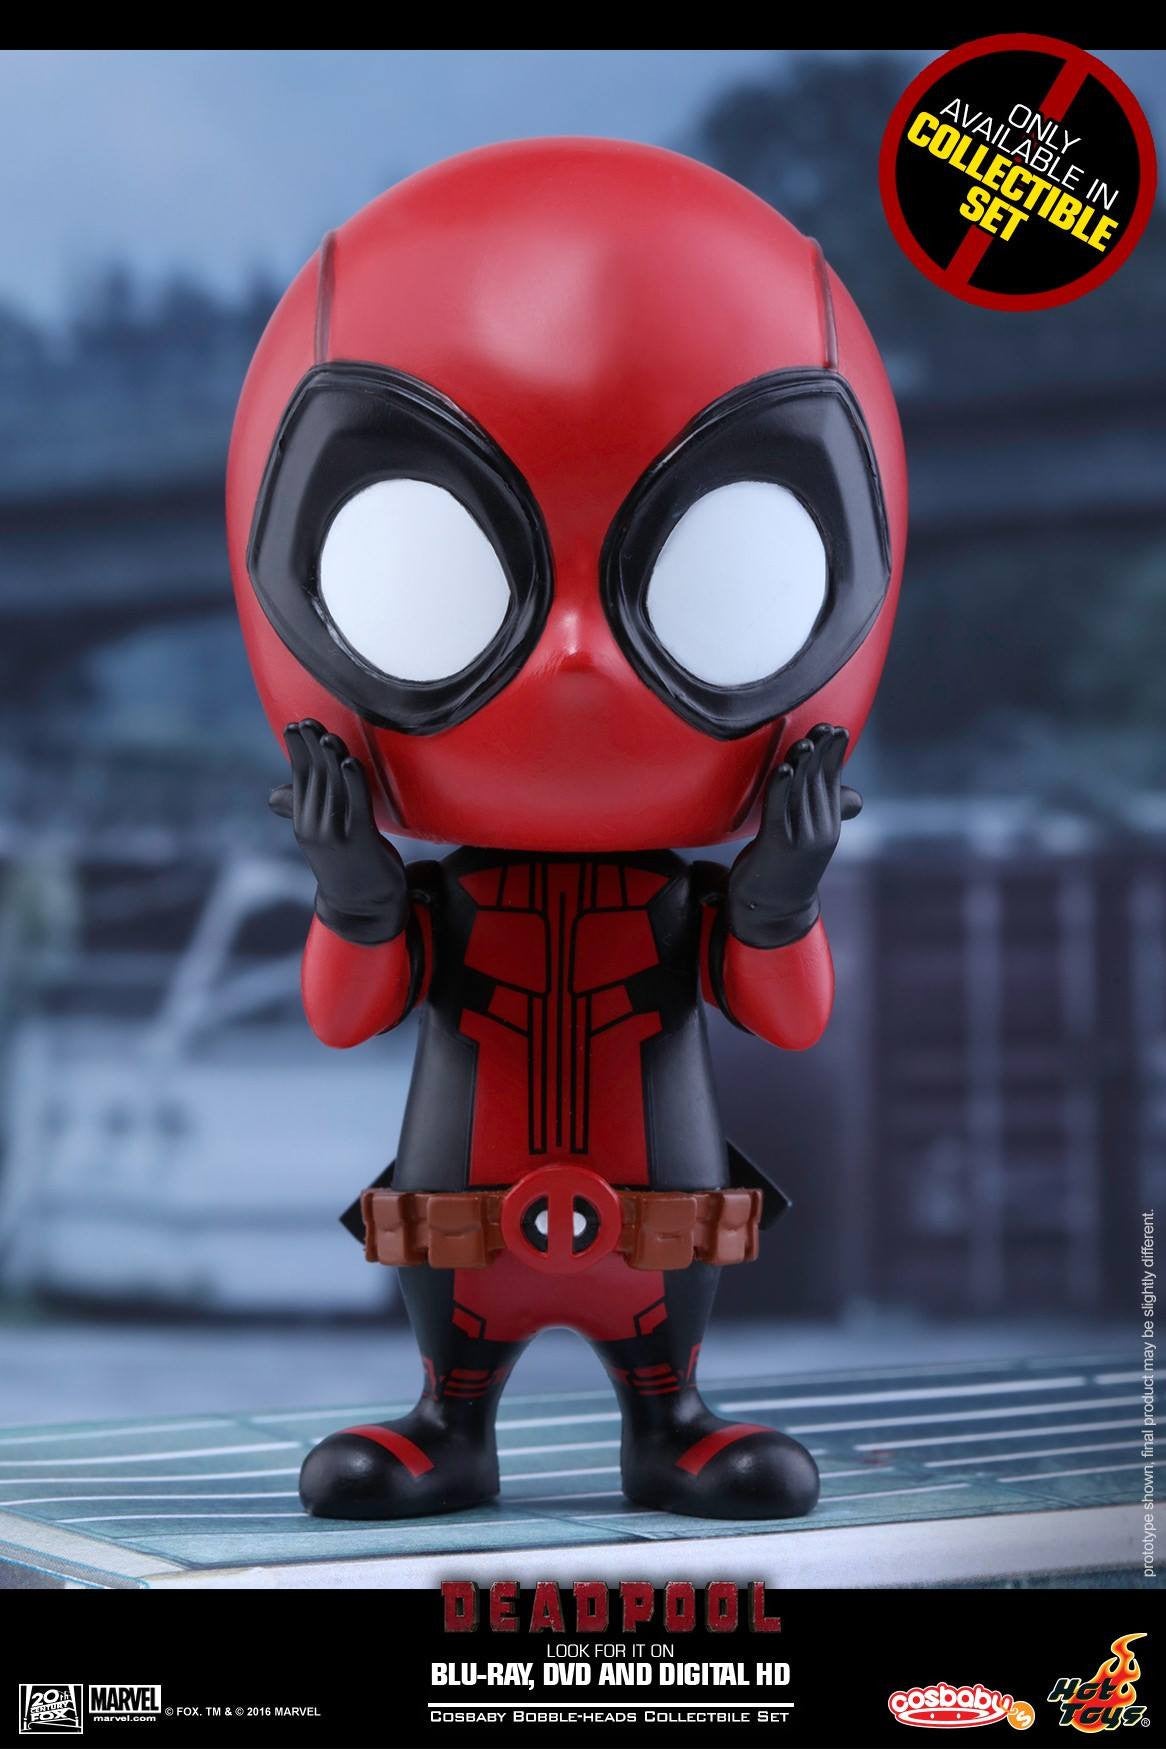 Hot Toys - COSB246 - Deadpool (Surprised, Fighting Pose, Heart Gesturing Versions) Cosbaby Bobble-Head Set - Marvelous Toys - 3